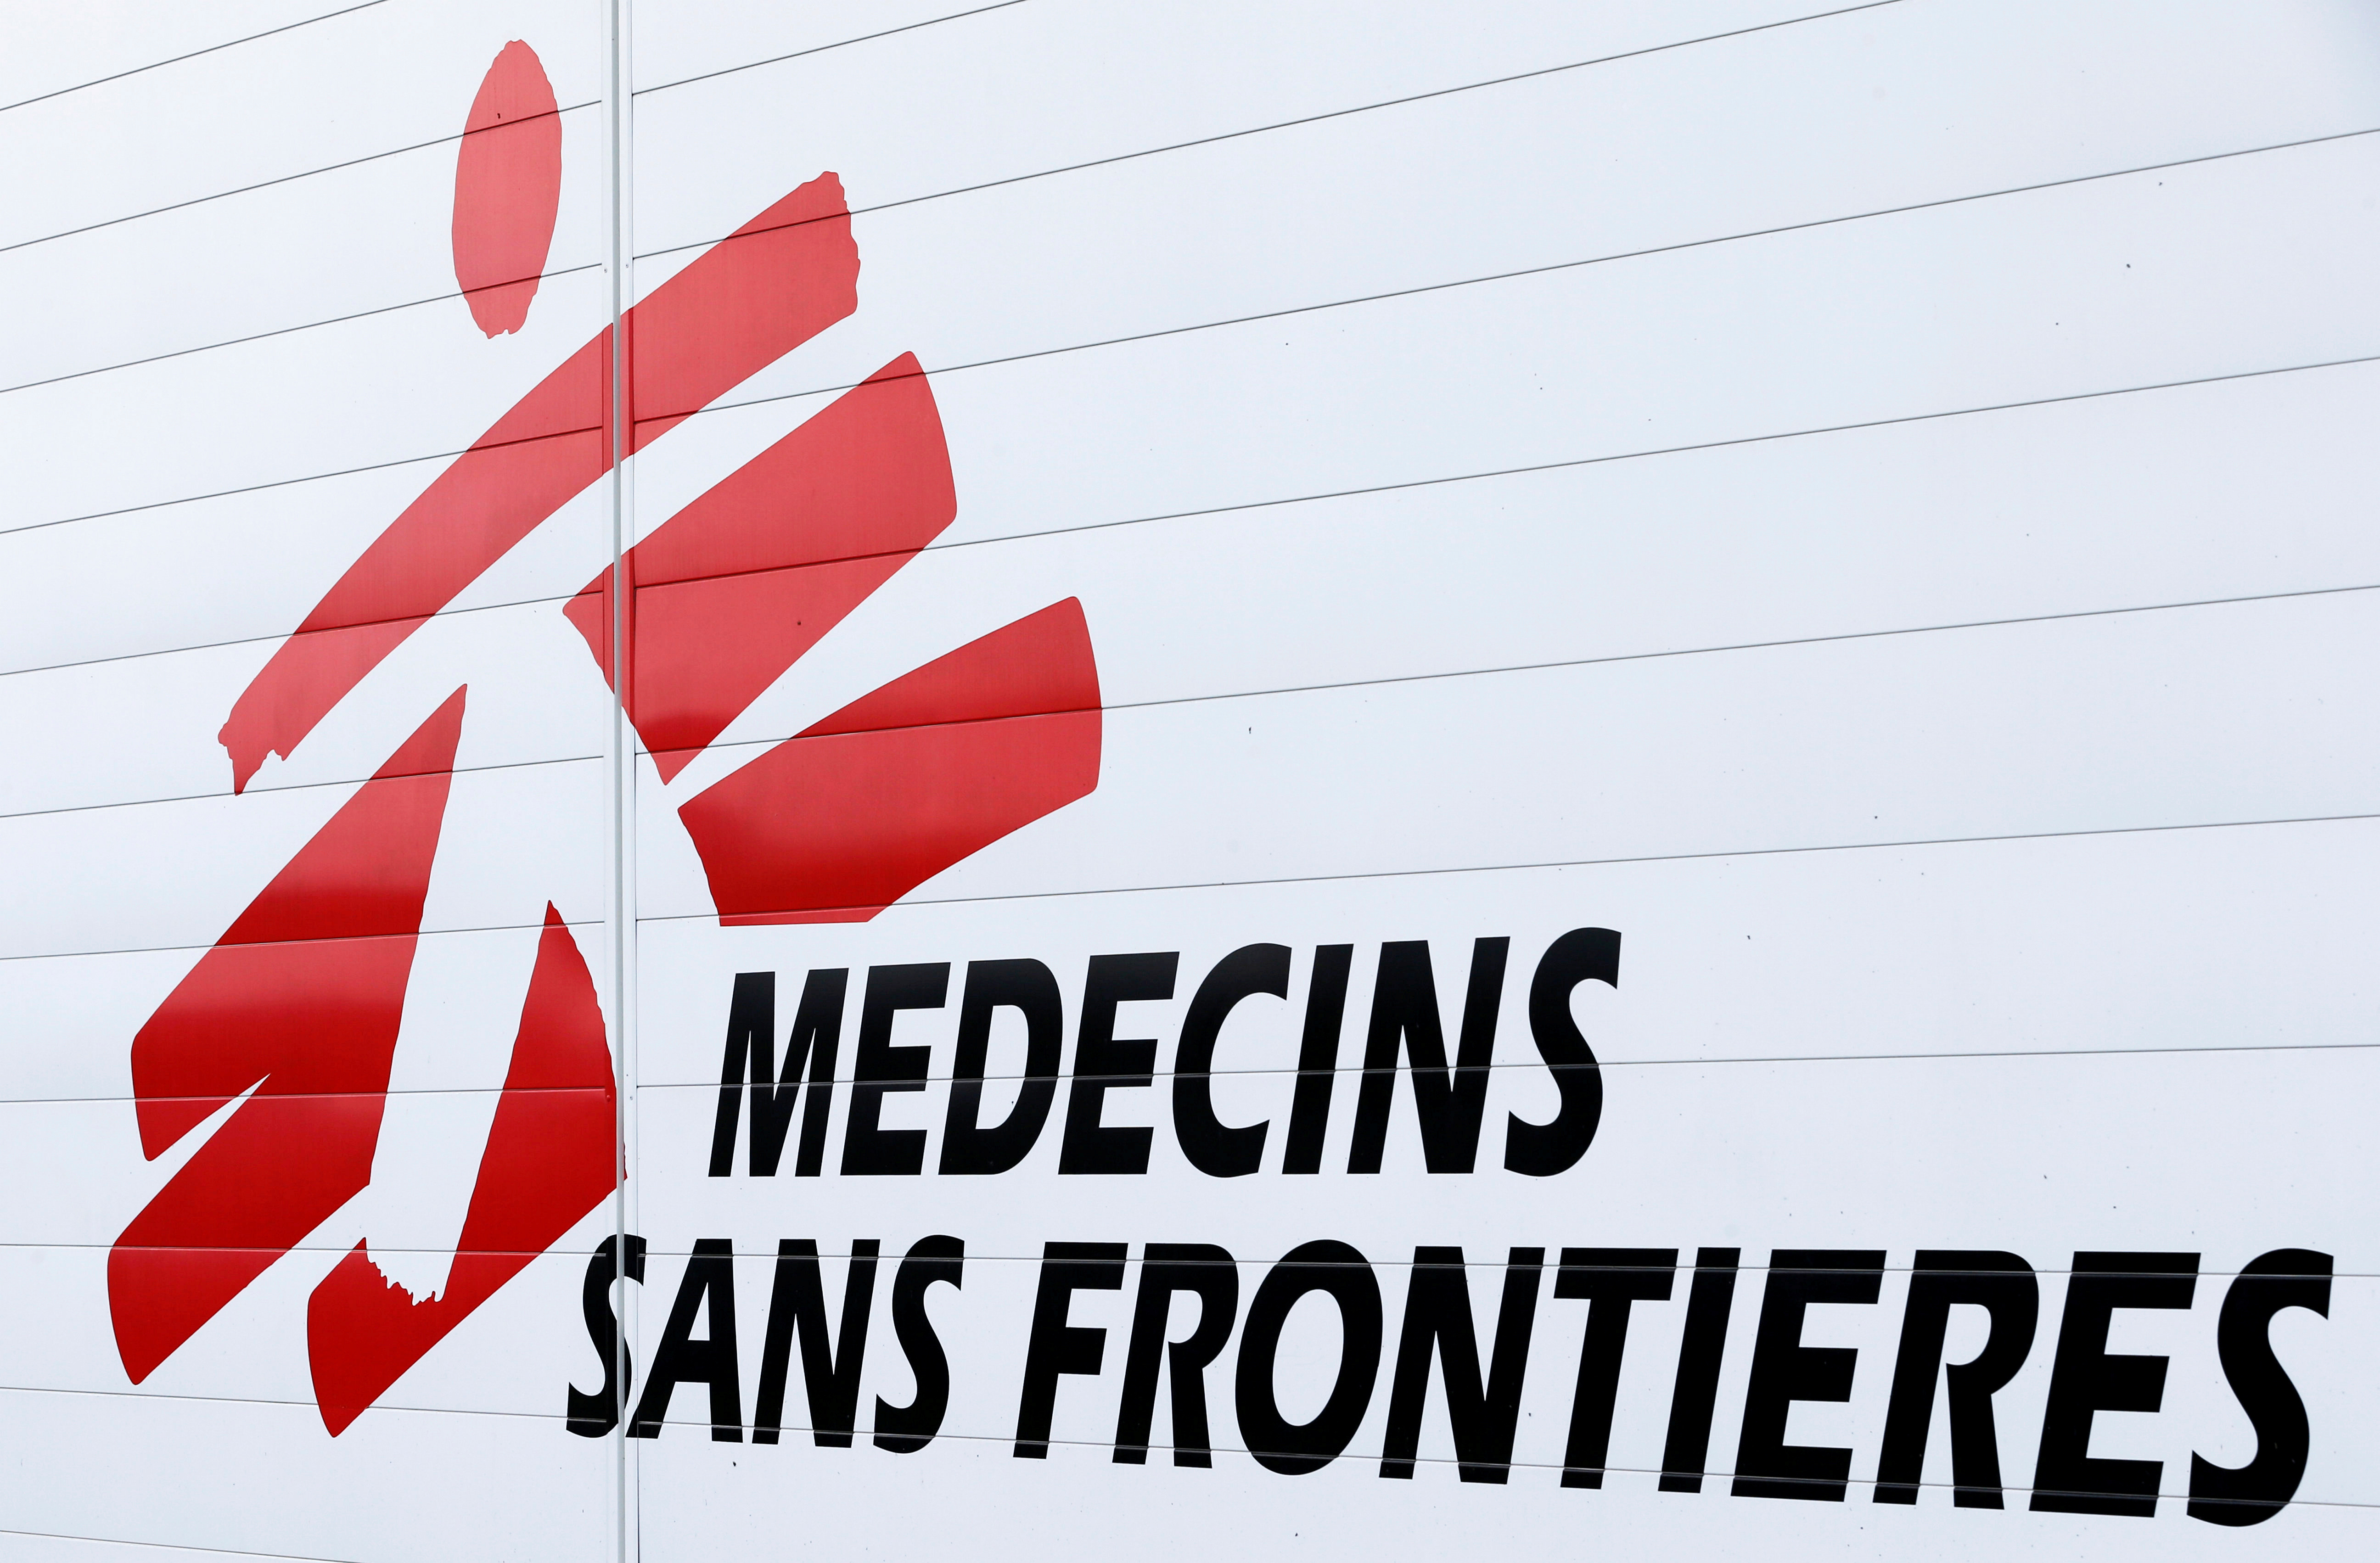 The logo of Médecins Sans Frontières (Doctors Without Borders) is seen in Mérignac, France, in 2018.